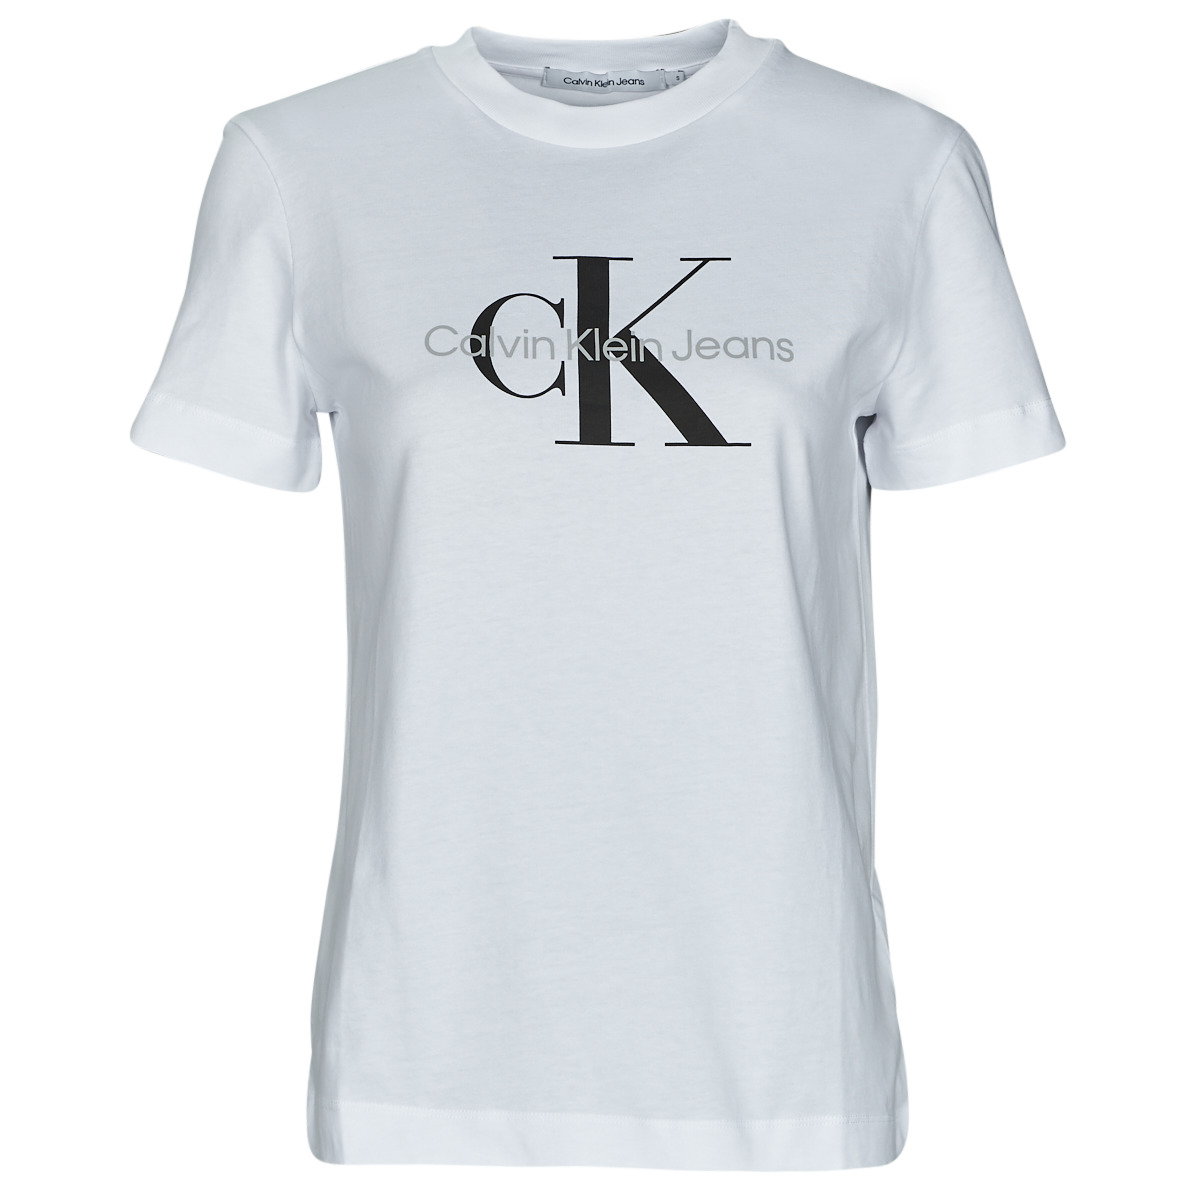 Calvin Klein Jeans CORE MONOGRAM REGULAR TEE White - Free delivery |  Spartoo NET ! - Clothing short-sleeved t-shirts Women